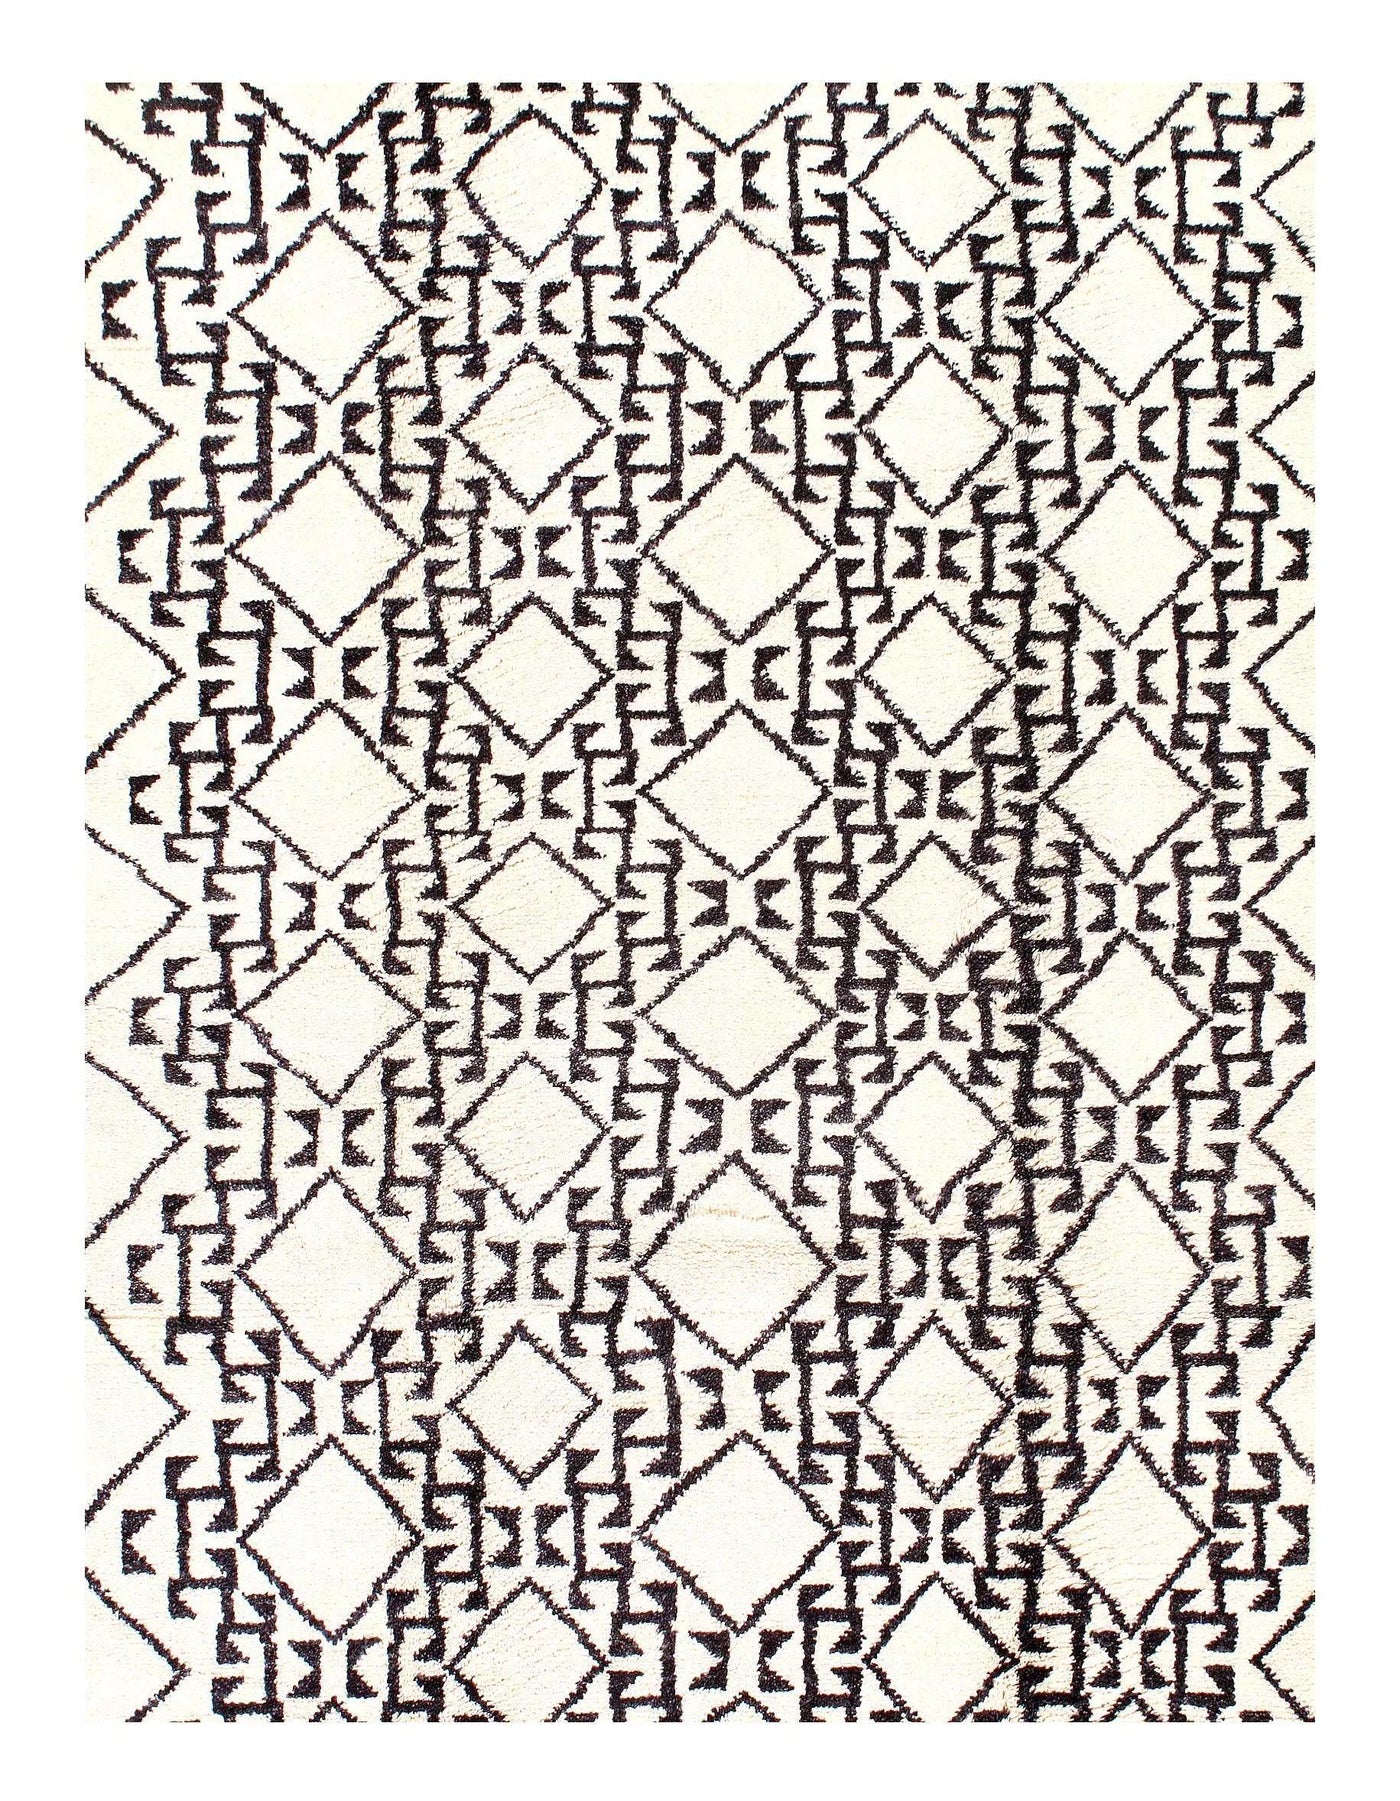 Moroccan Hand-Knotted Rug - 6′2" × 9′